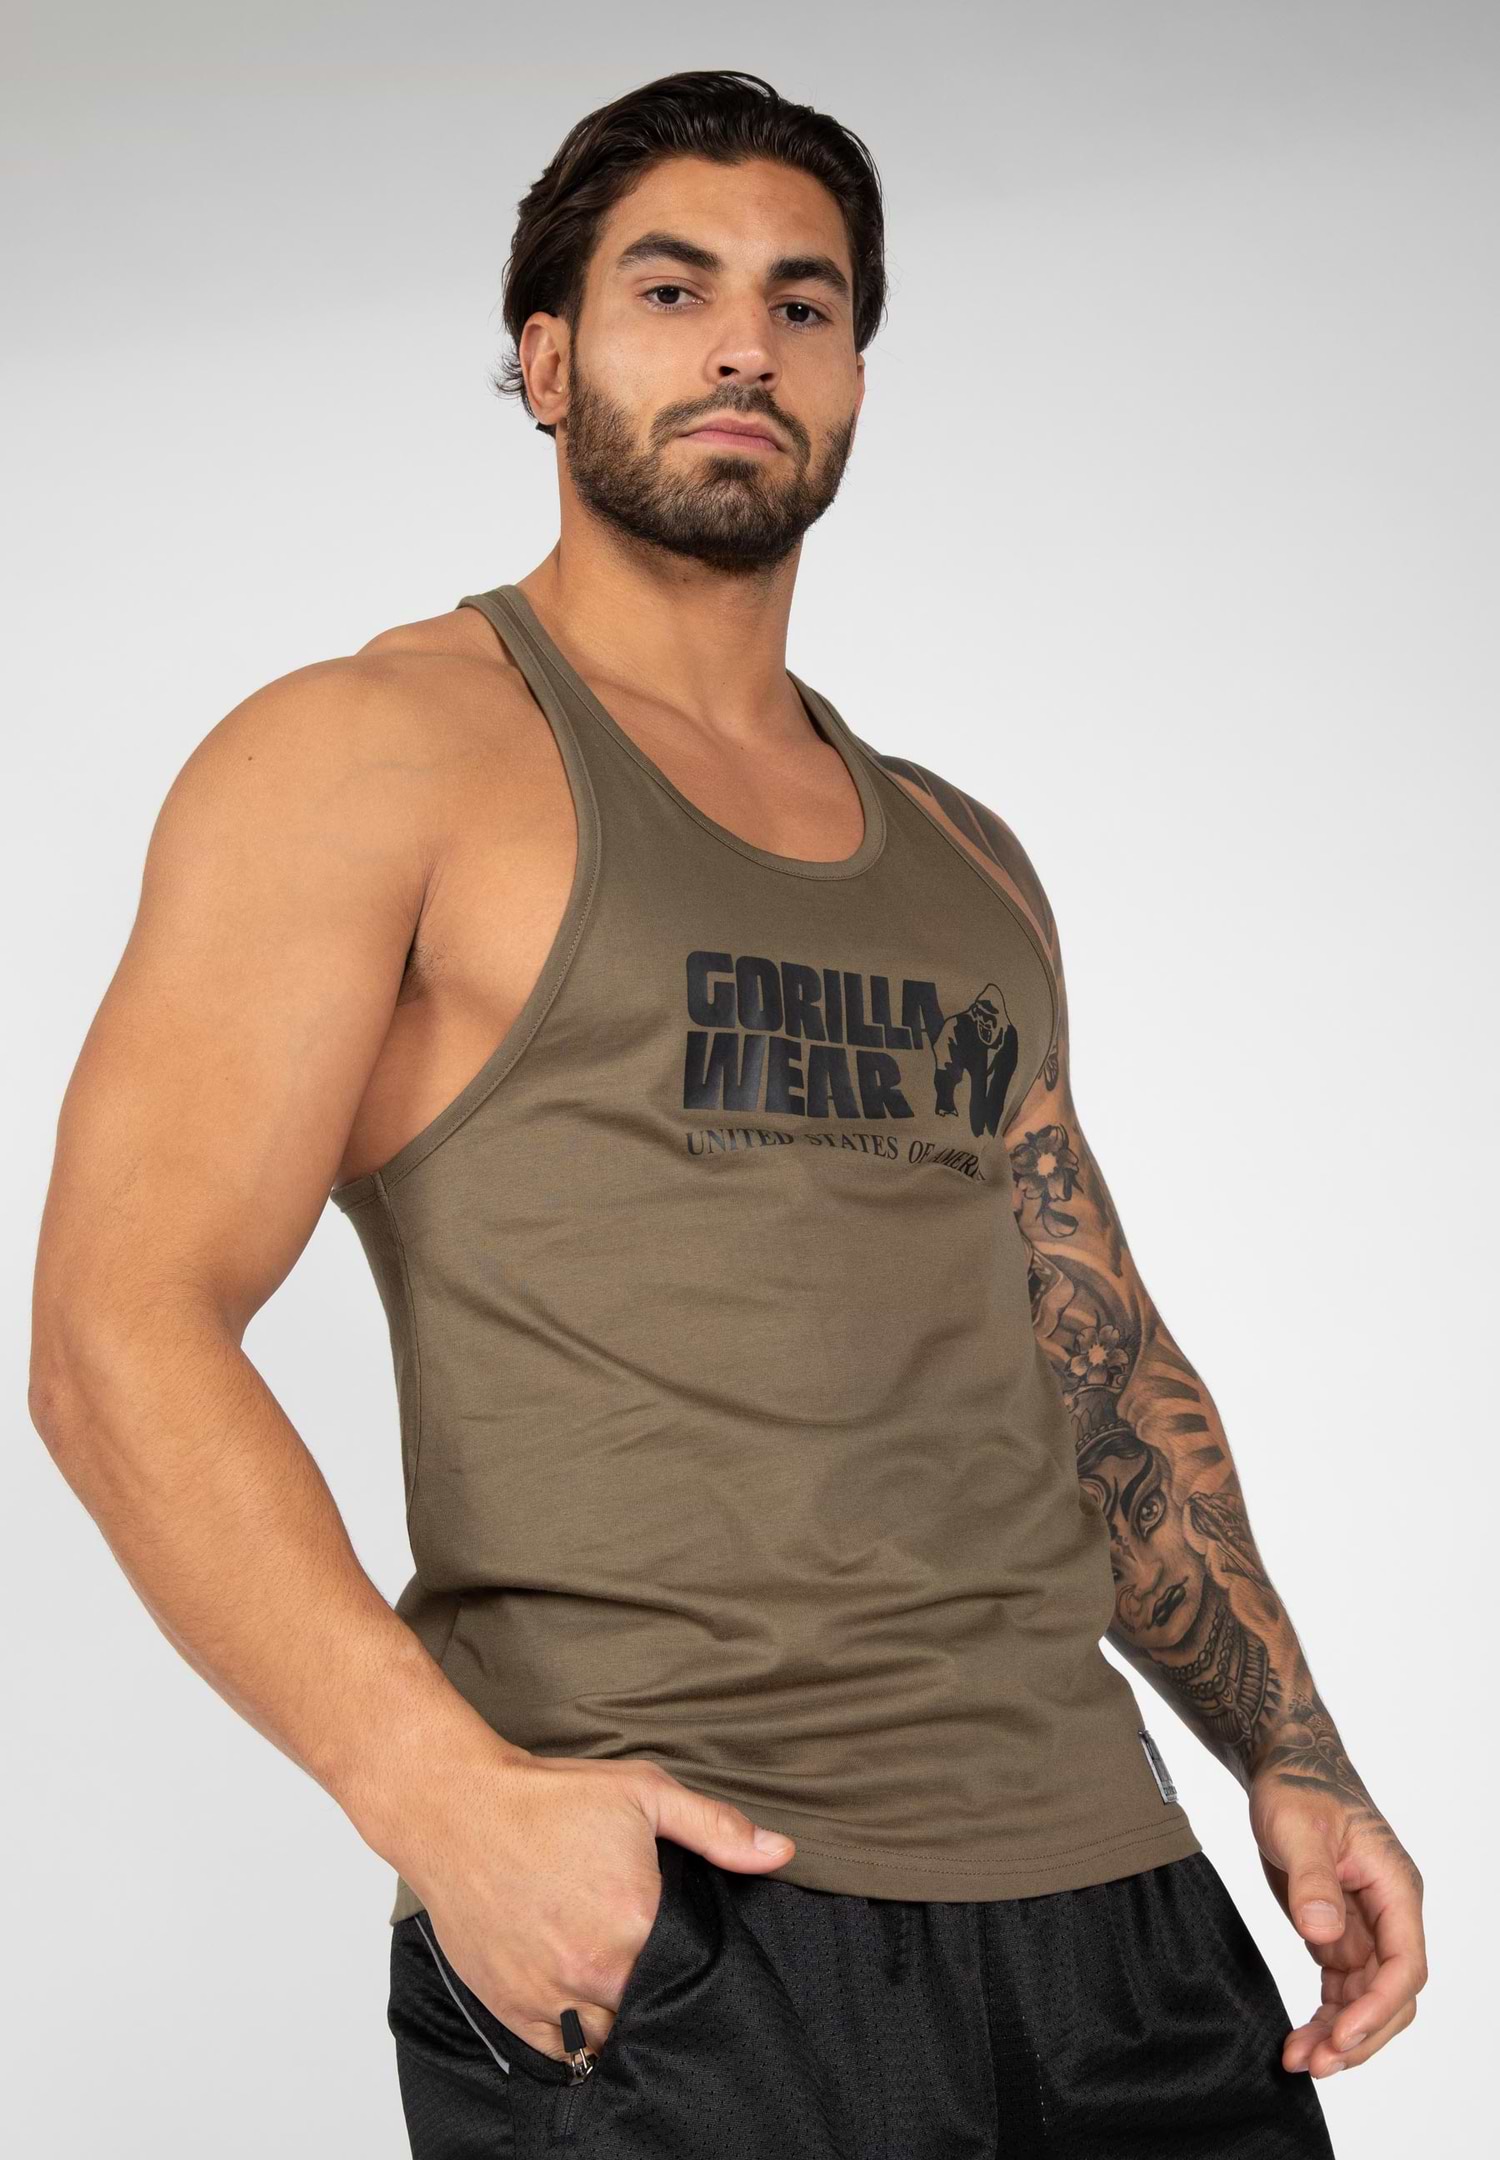 Gorilla Wear Classic Work Out Top (Army Green)